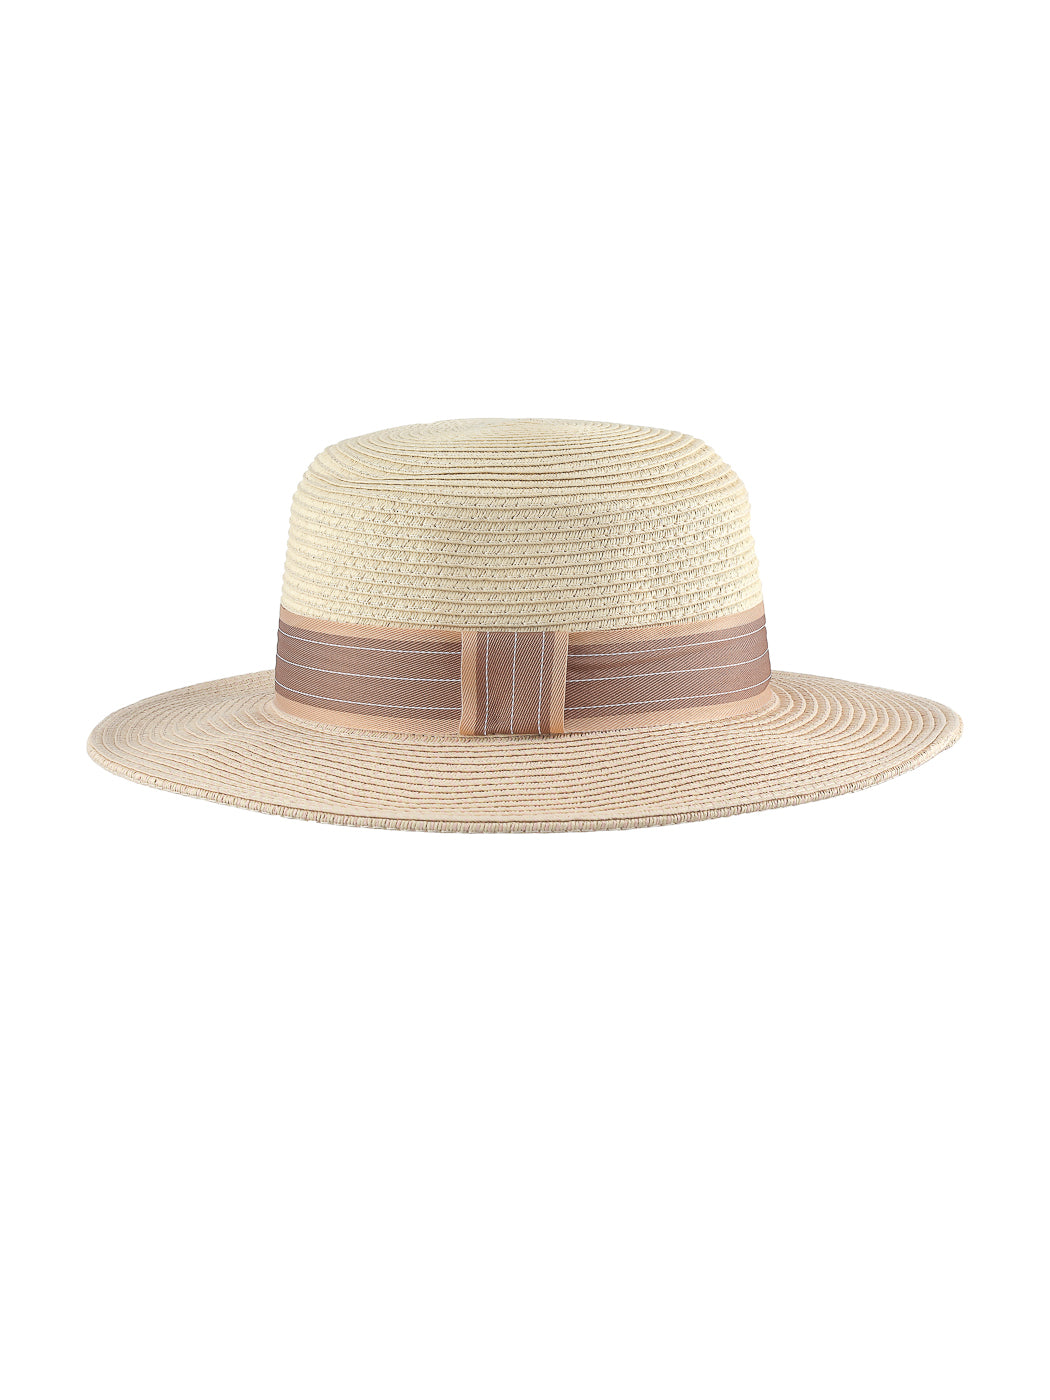 MINISO BRITISH STYLE BICOLOR STRAW HAT WITH FLAT TOP ( PINK ) 2010116810101 FASHIONABLE HAT